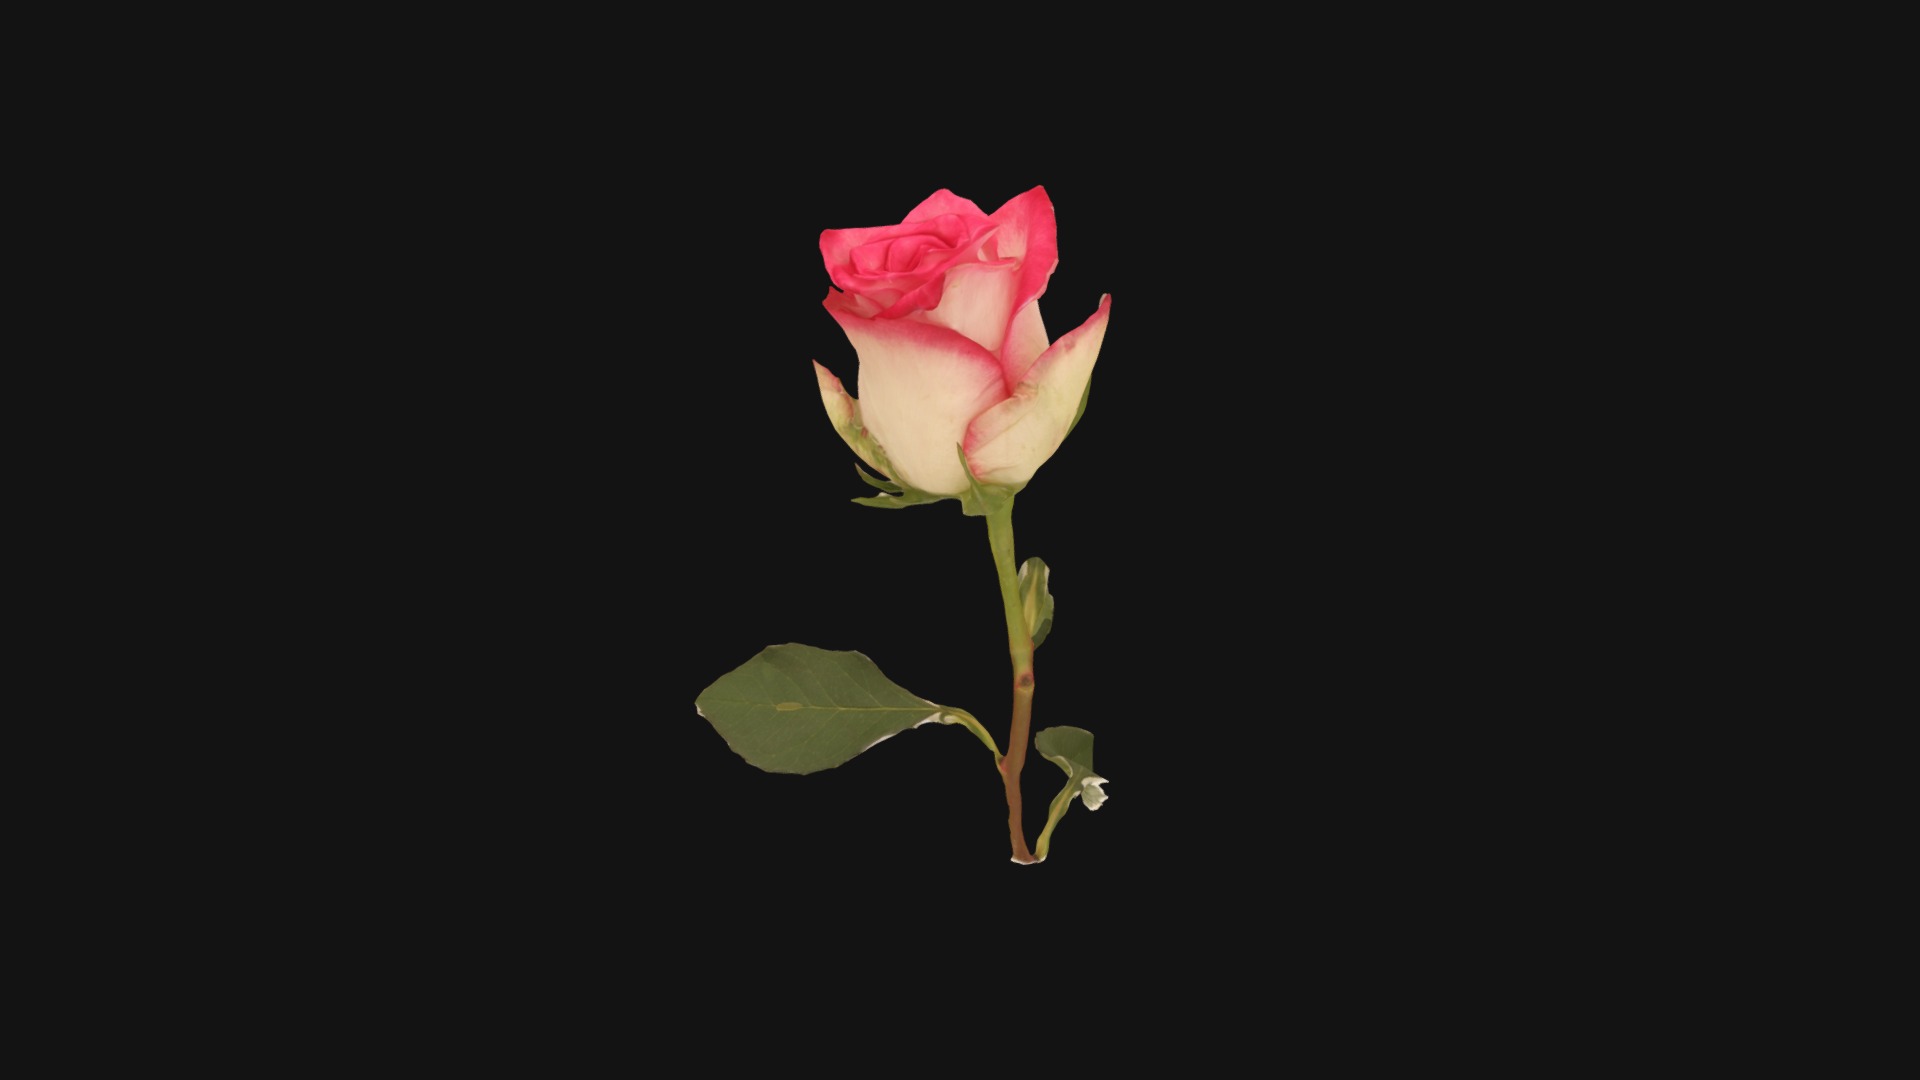 3D model Fw20 – Red Rose - This is a 3D model of the Fw20 - Red Rose. The 3D model is about a single rose on a black background.